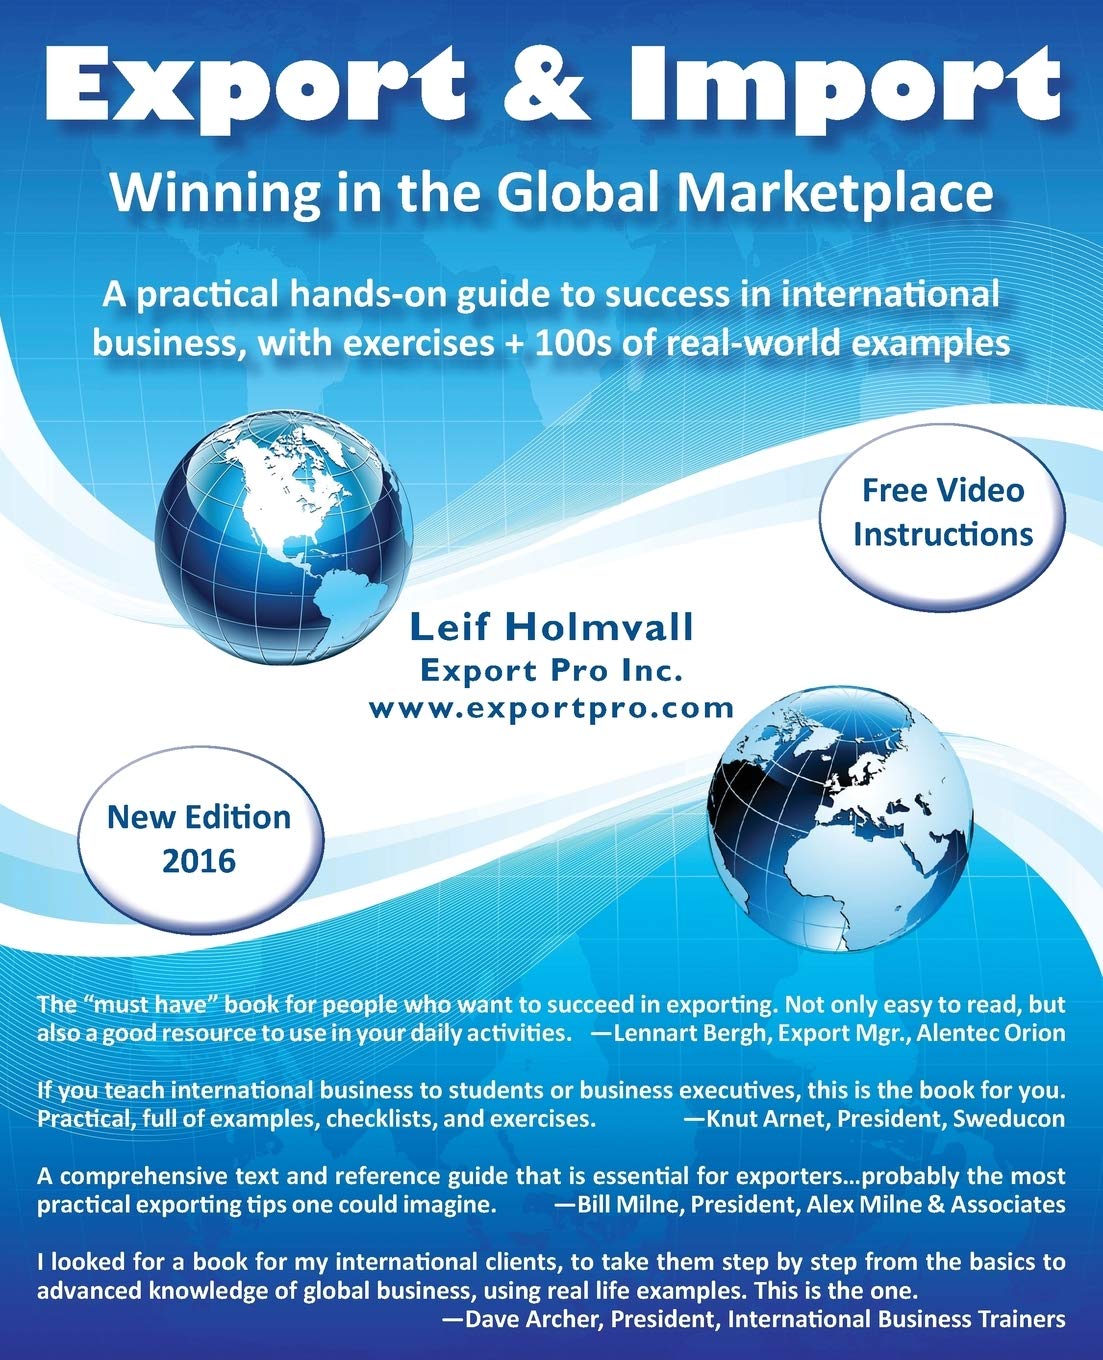 Export & Import - Winning in the Global Marketplace SureShot Books